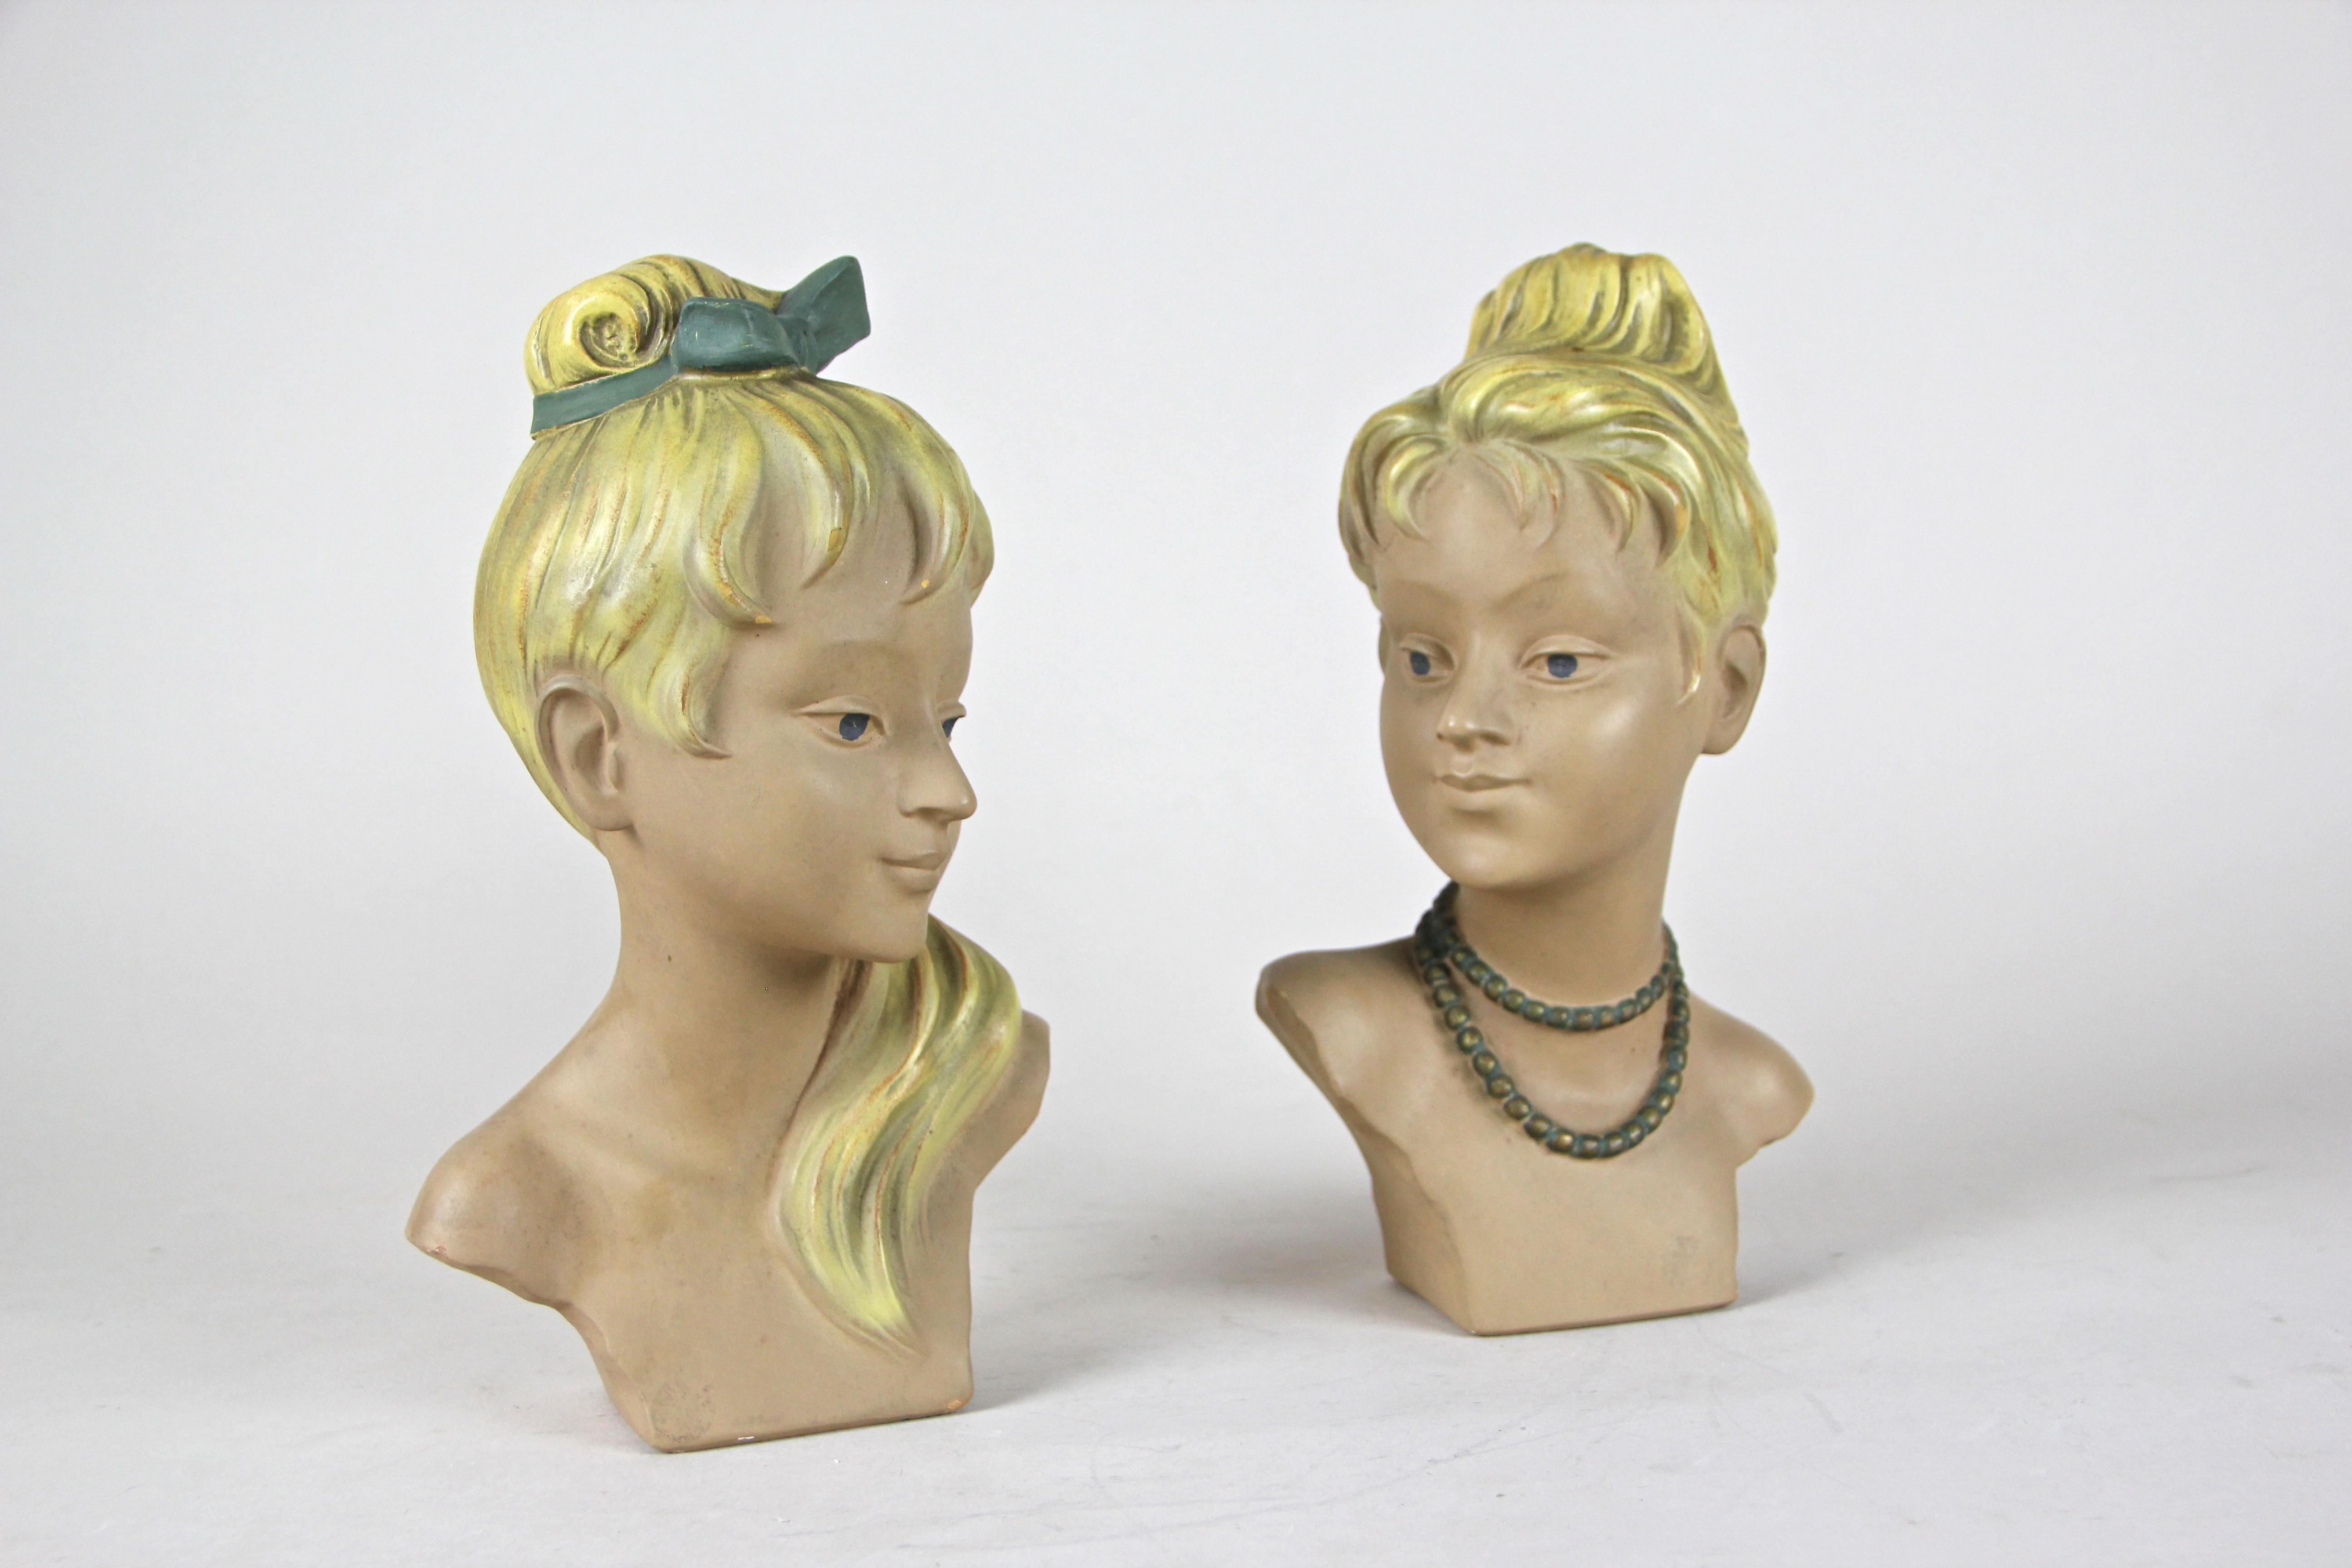 Wonderful pair of busts by Guiseppe Carli out of Italy, circa 1950. The decorative midcentury set of two busts, signed by G. Carli on the back, shows two young women in different styles: one carrying her long blonde hair over the shoulder (Mod. No.